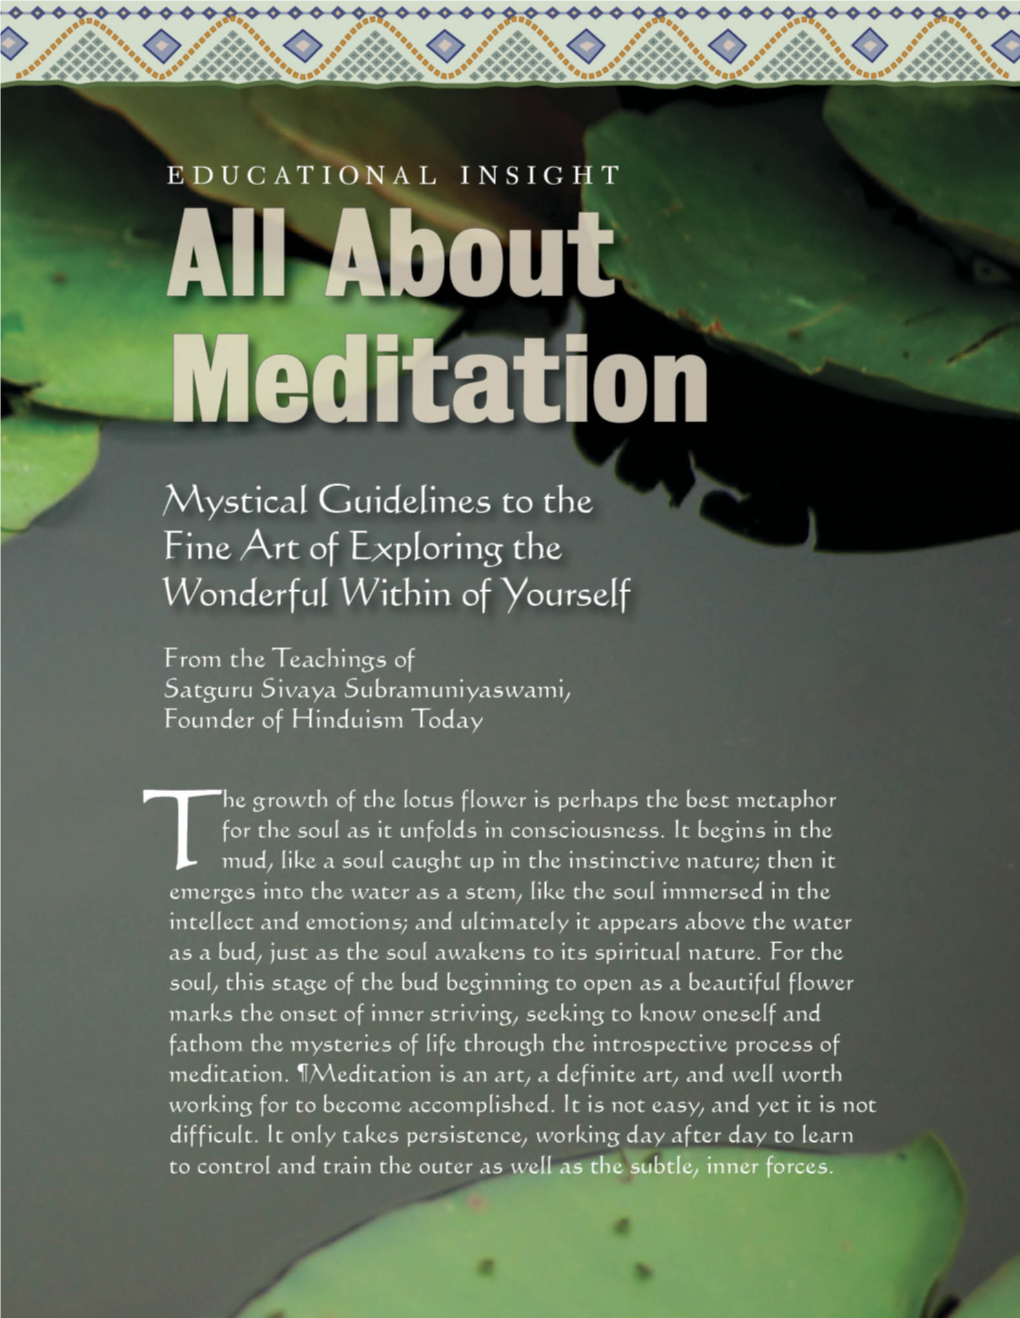 All About Meditation